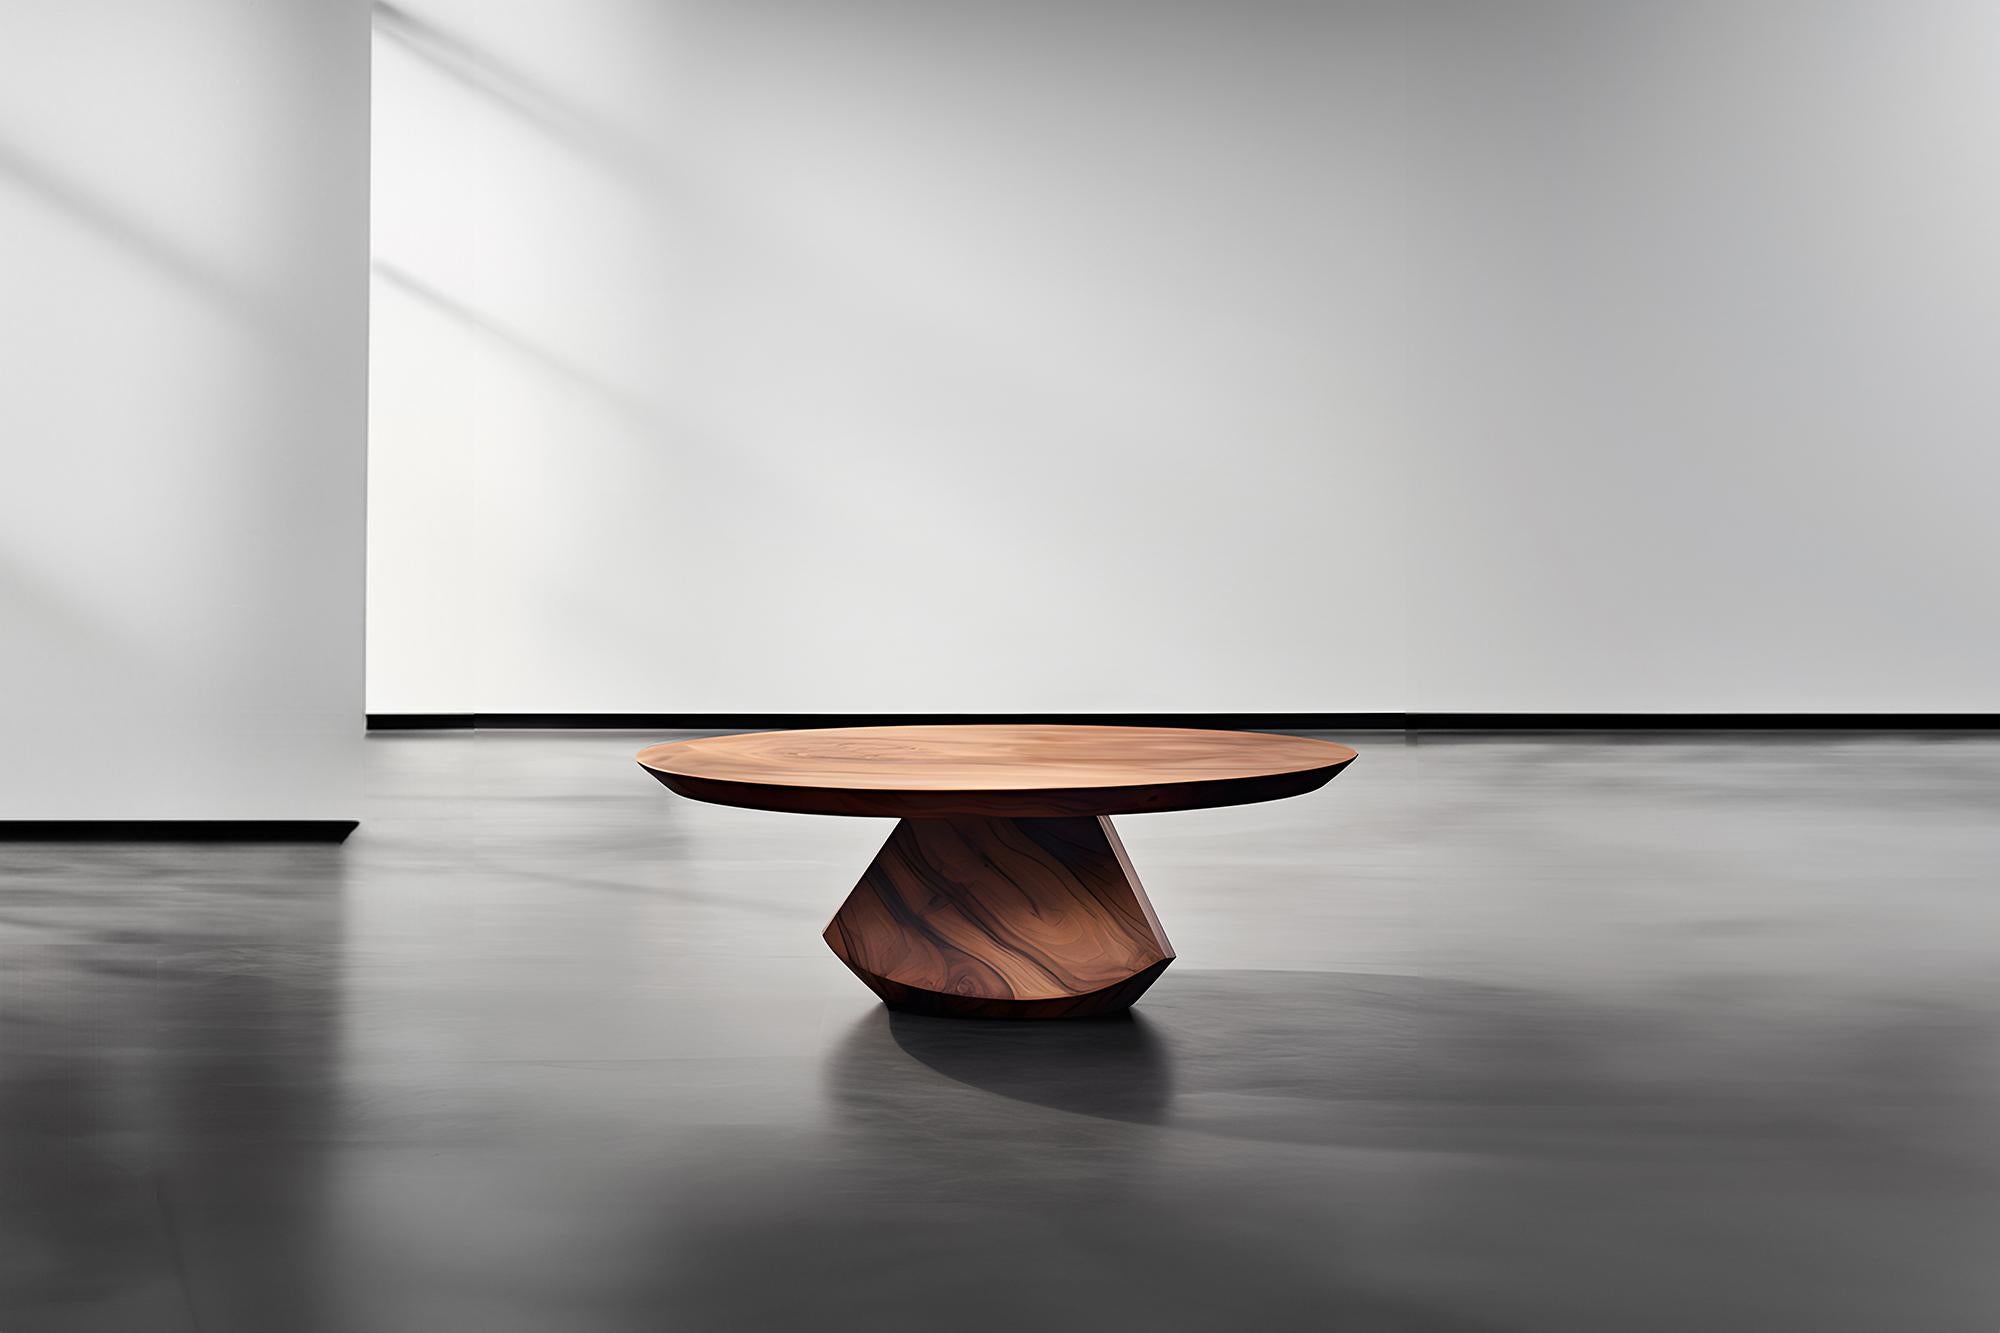 Mexican Unique Circular Table Solace 41: Artisan Craftsmanship in Solid Walnut For Sale